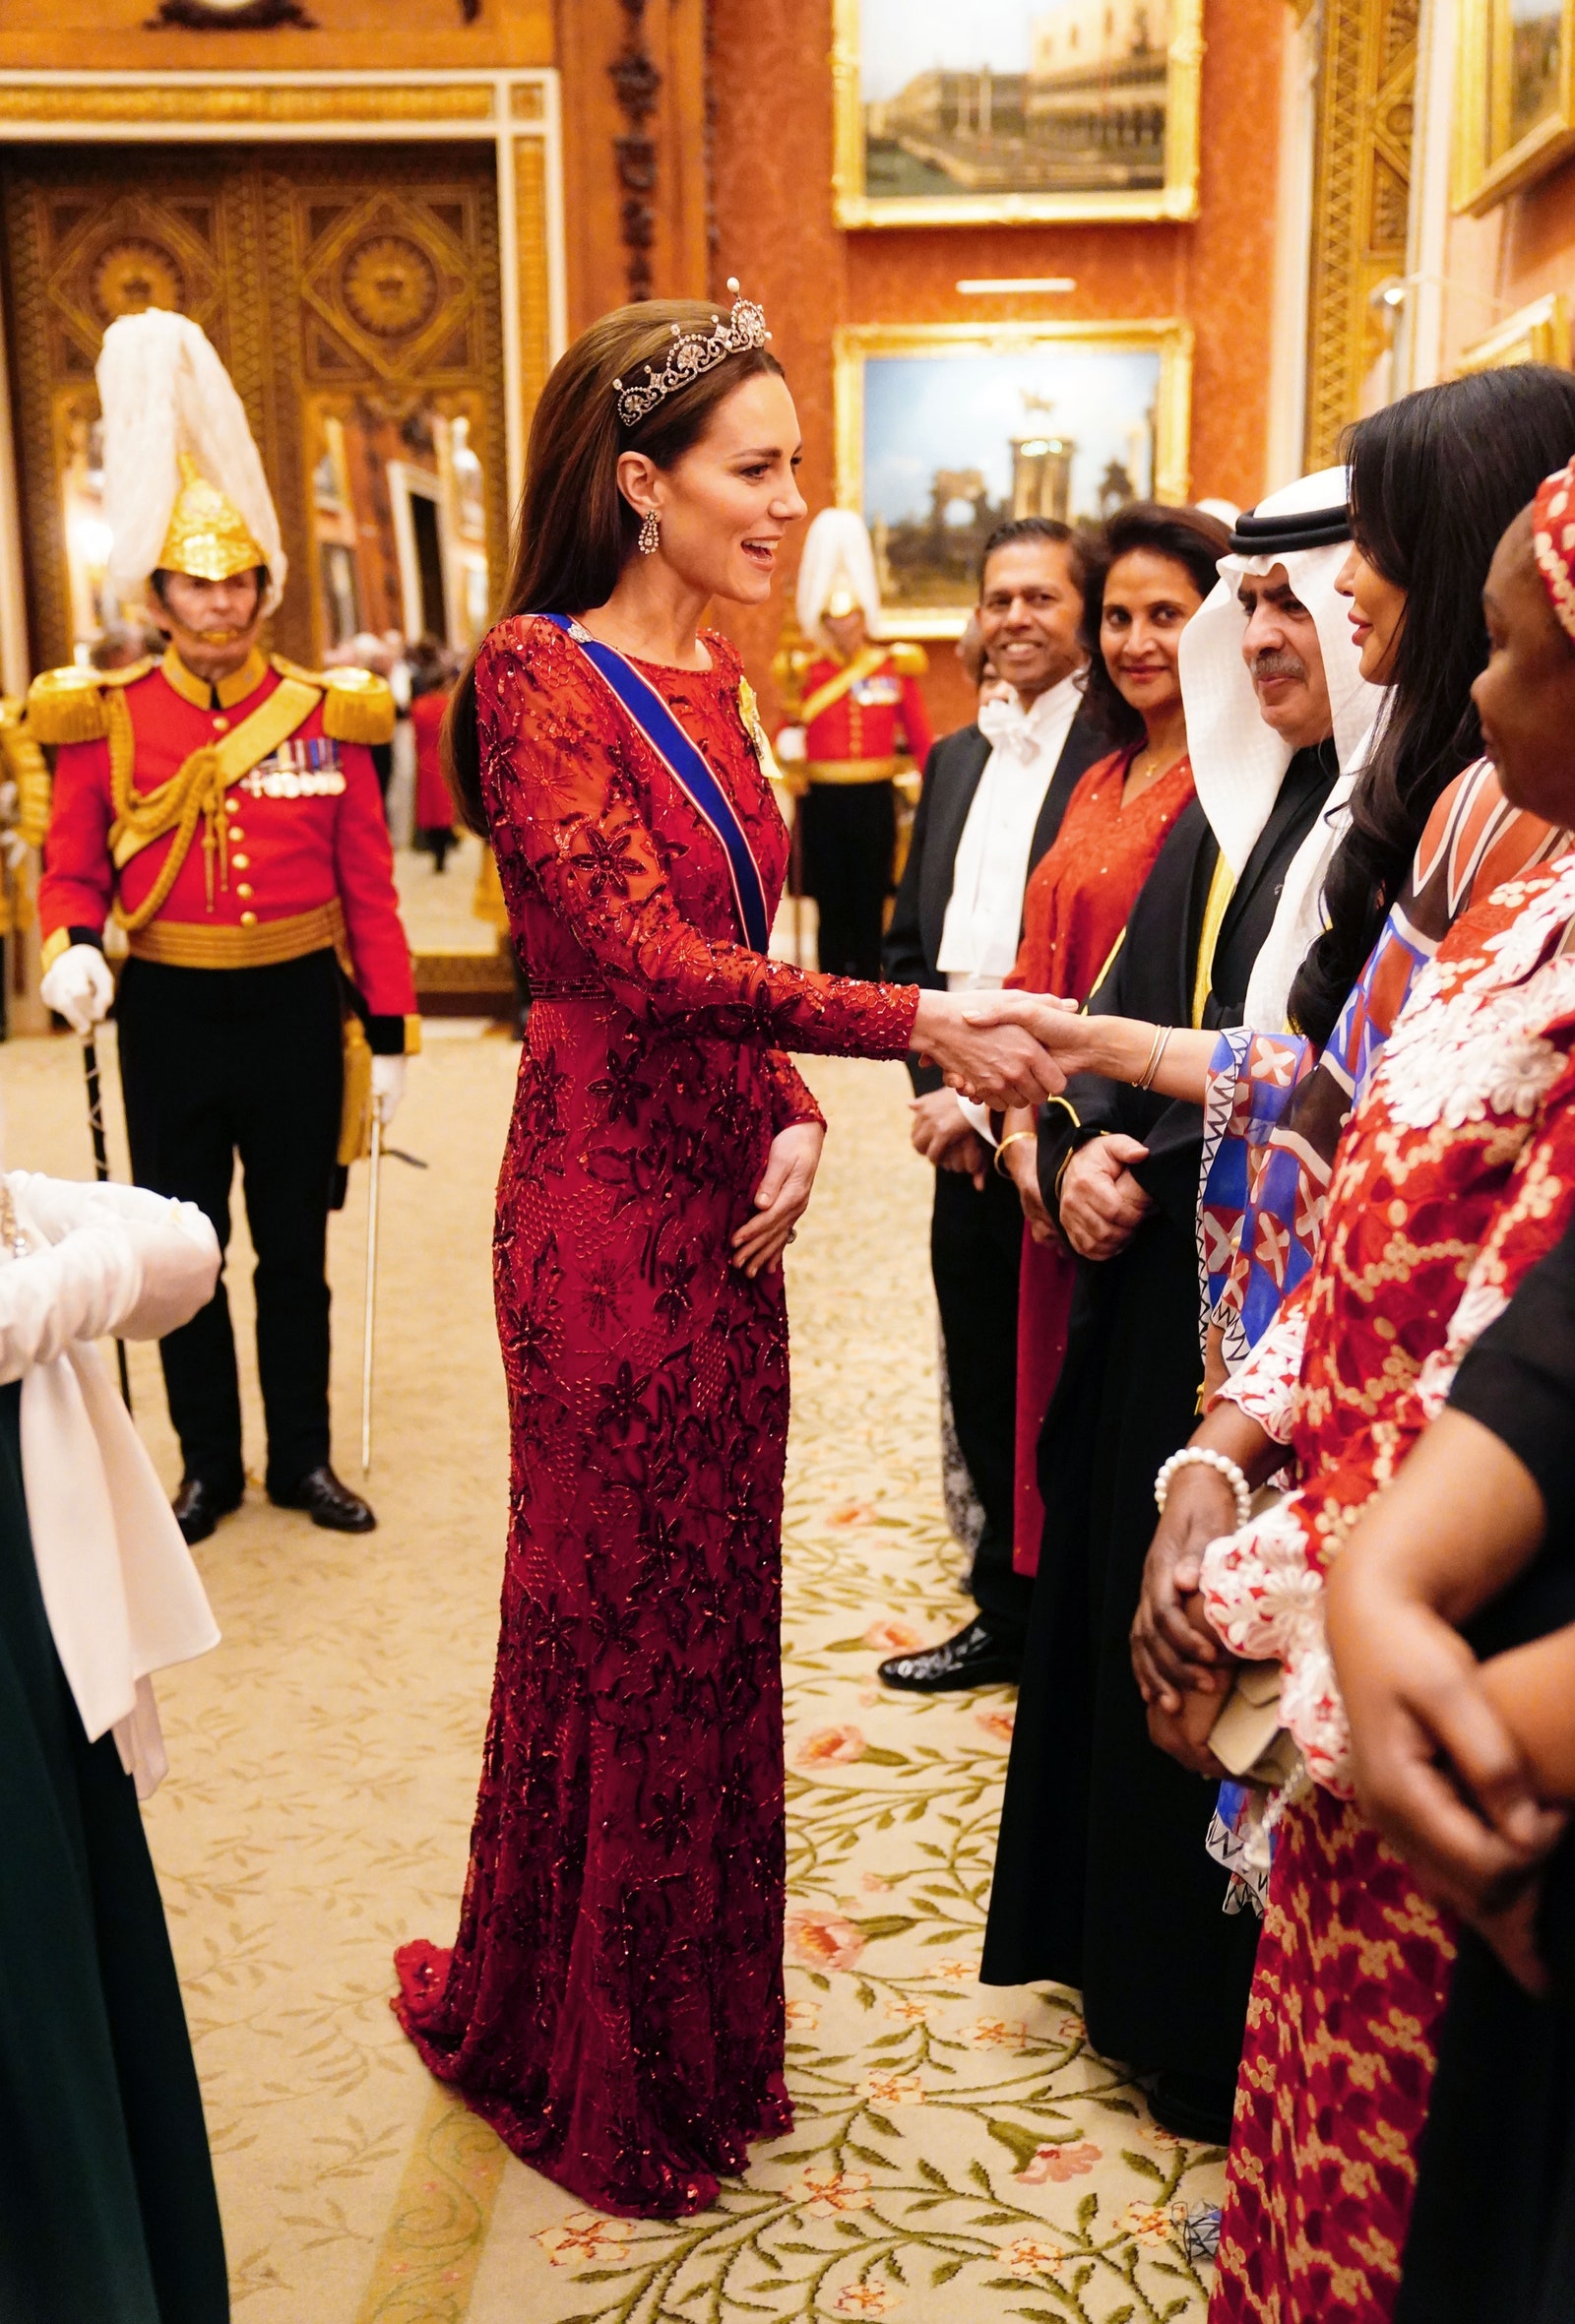 Kate Middleton Wore the Lotus Flower Tiara With a Red Jenny Packham Gown at Diplomatic Reception—See Pics